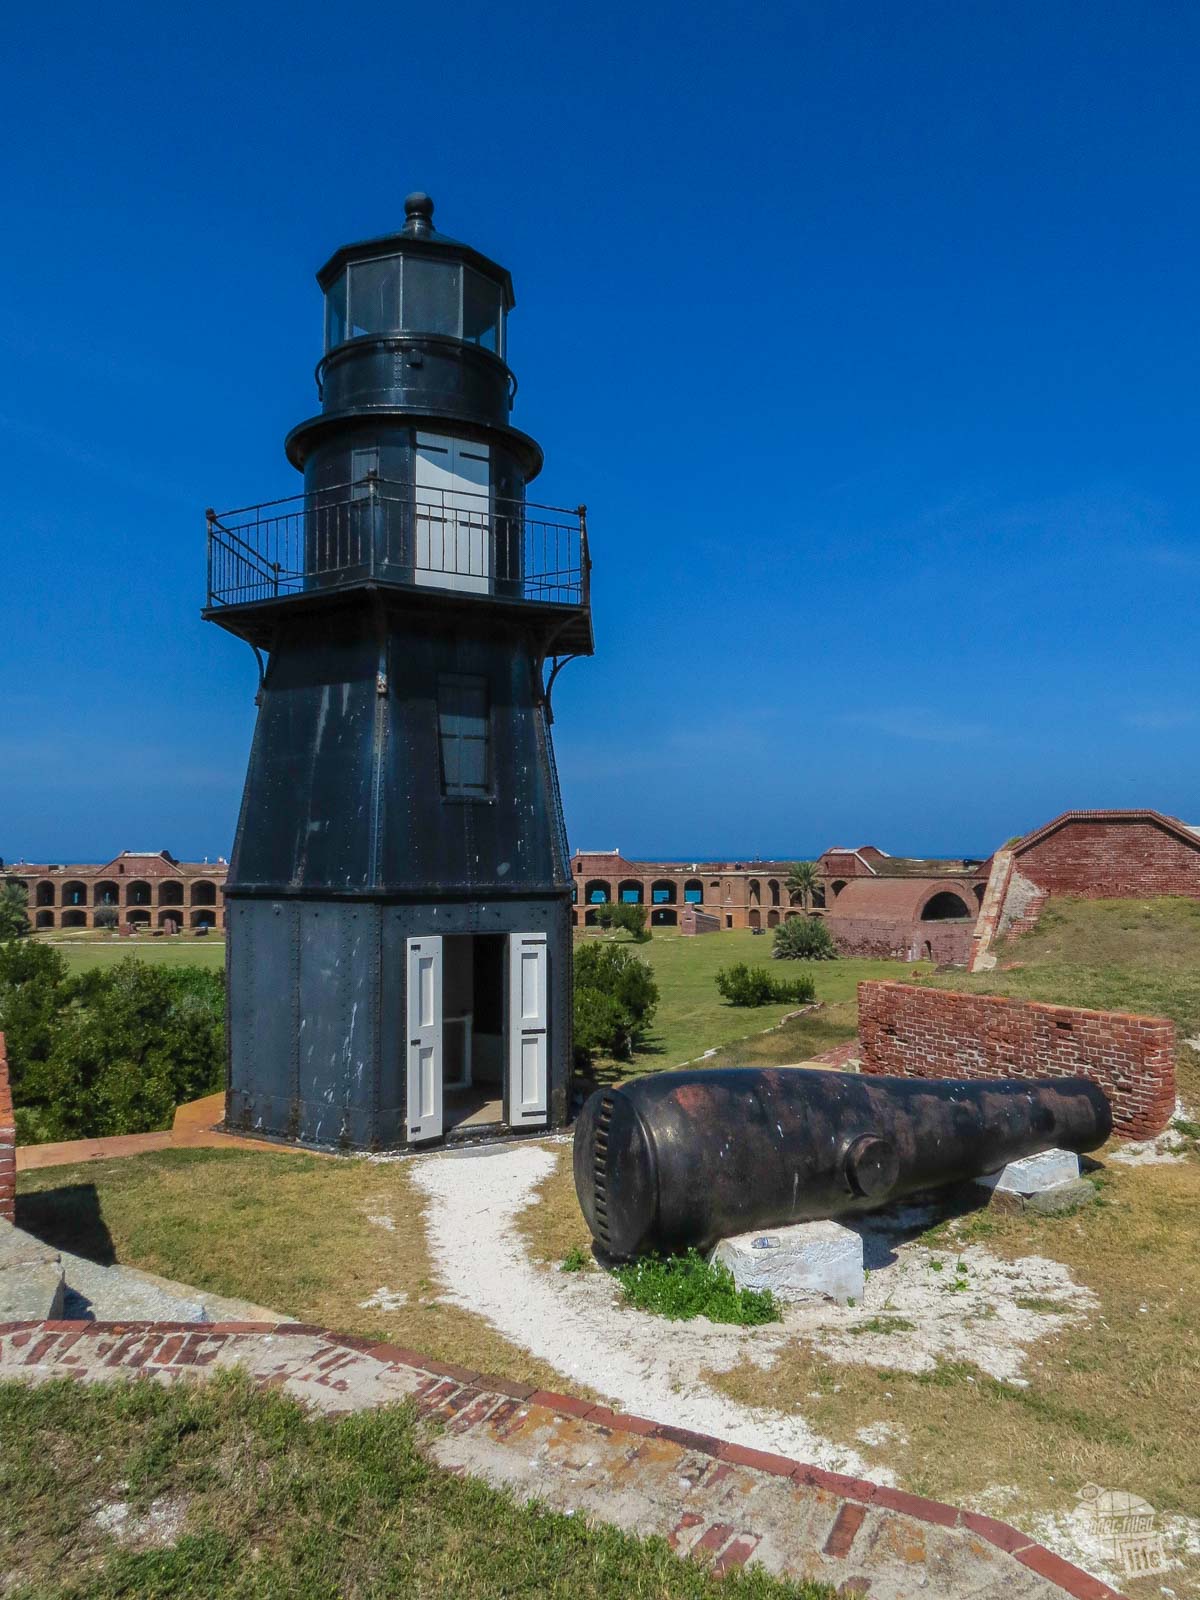 The Fort Jefferson Light at Dry Tortugas National Park.